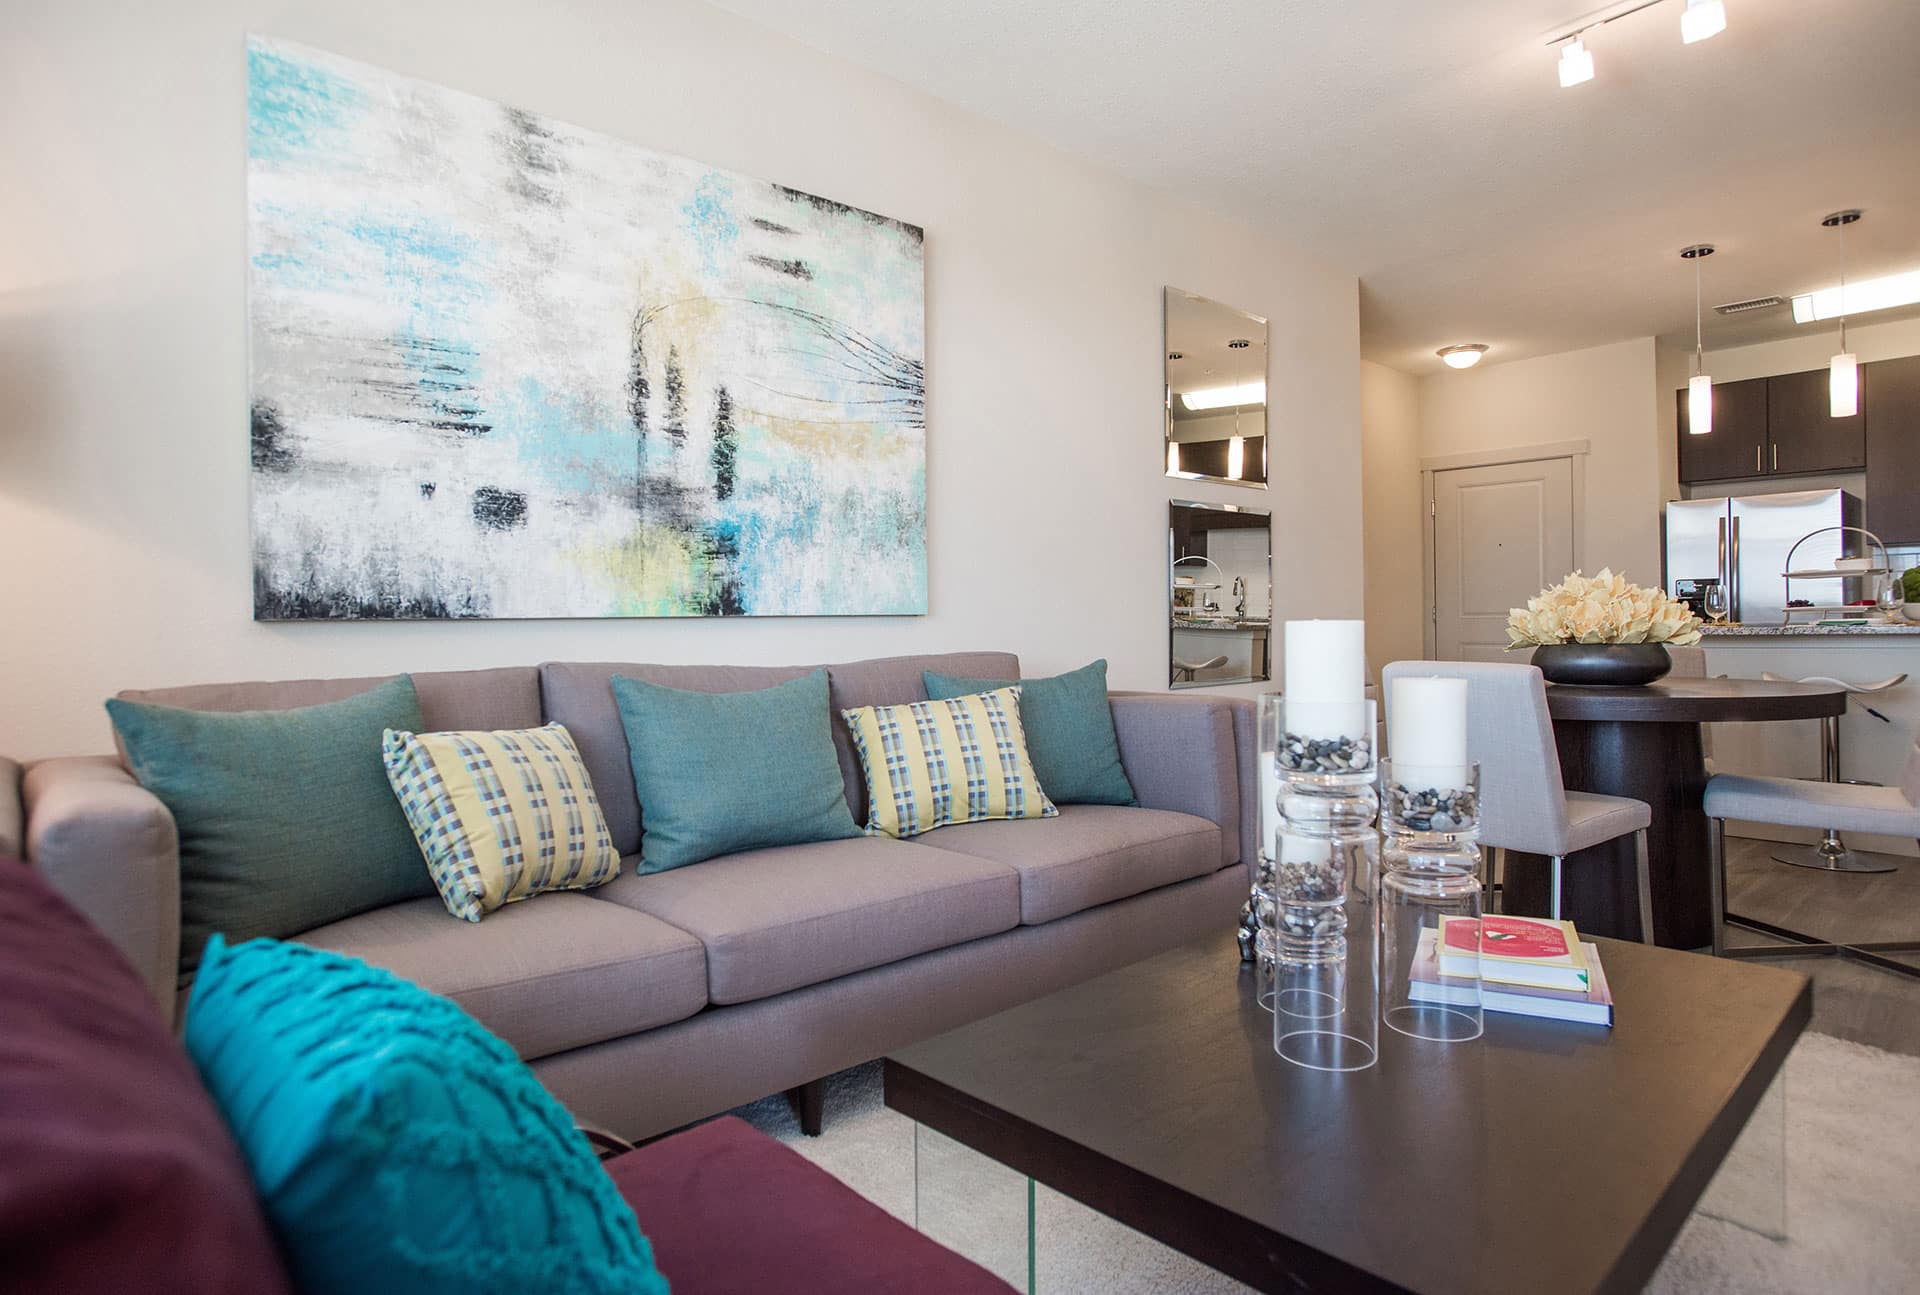 Gray couch with teal and yellow accent pillows, espresso coffee table.